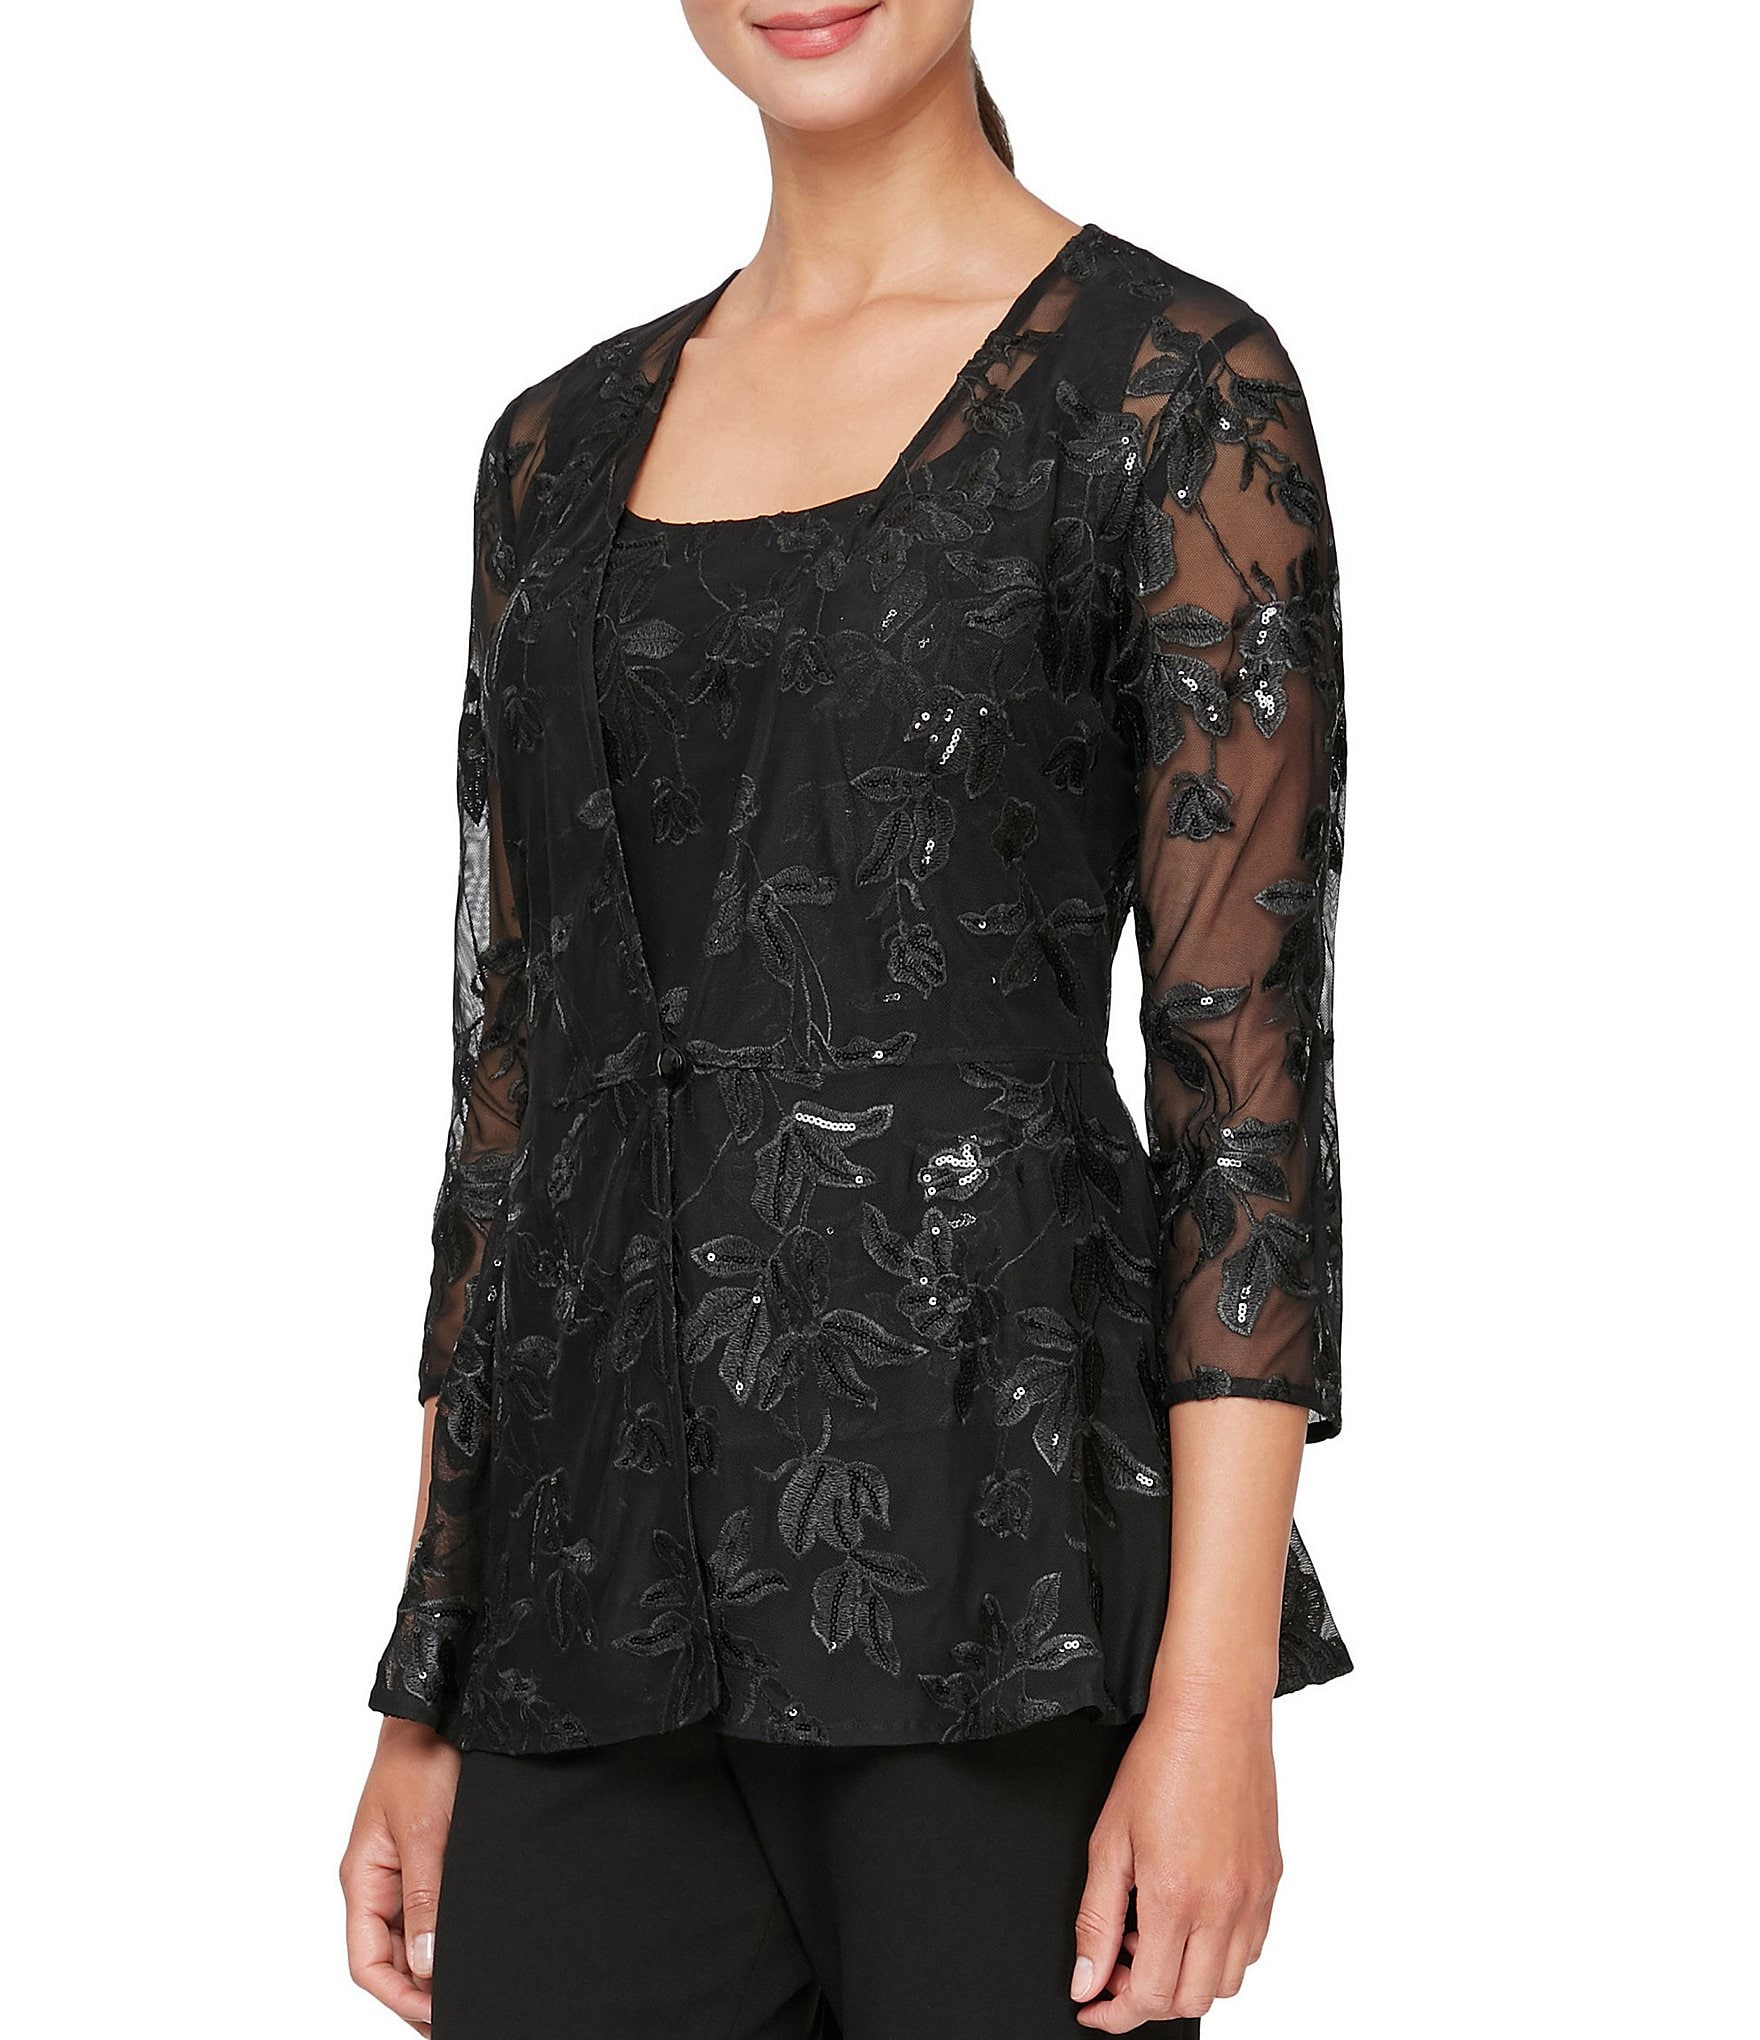 https://dimg.dillards.com/is/image/DillardsZoom/zoom/alex-evenings-petite-size-34-sleeve-floral-embroidered-scoop-neck-twinset/00000000_zi_735ca436-aba8-4118-a0df-080481000ab4.jpg